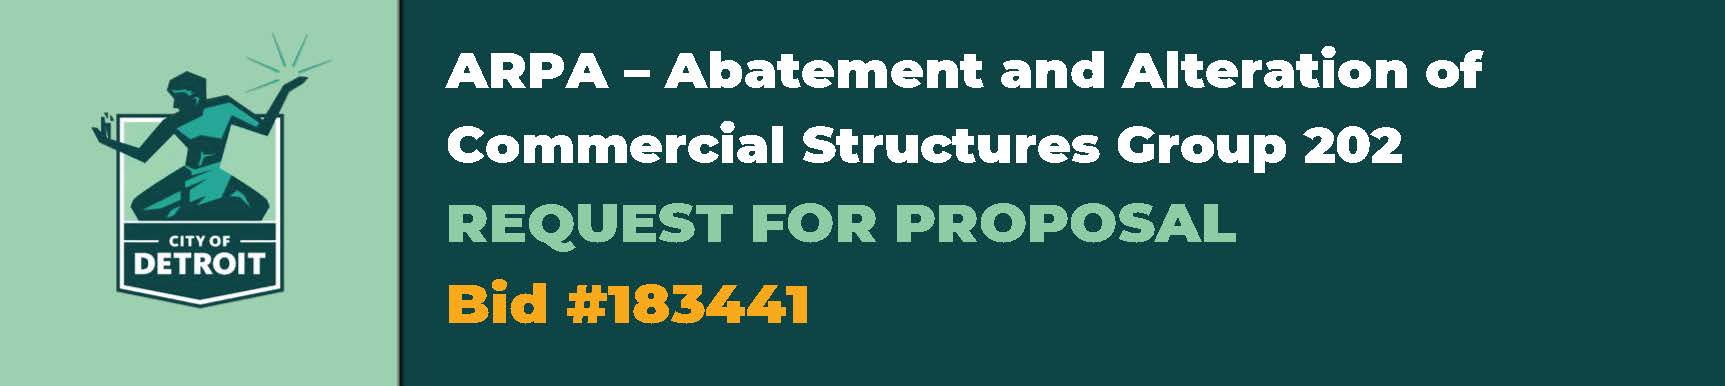 ARPA – Abatement and Alteration of Commercial Structures Group 202